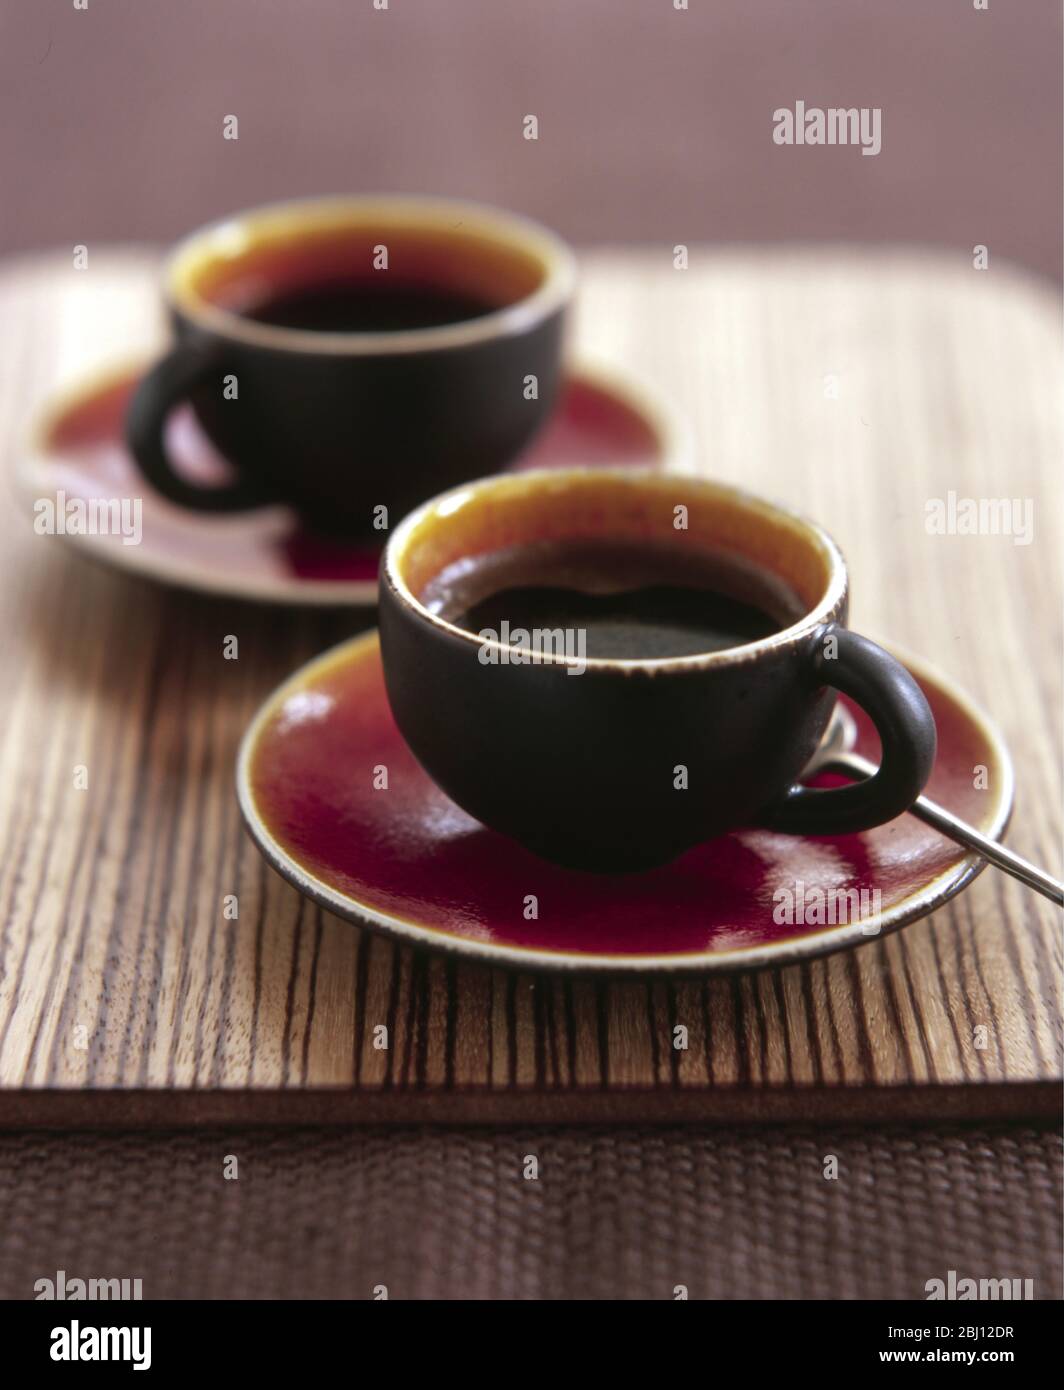 https://c8.alamy.com/comp/2BJ12DR/two-attractive-modern-pottery-cups-of-espresso-coffee-2BJ12DR.jpg